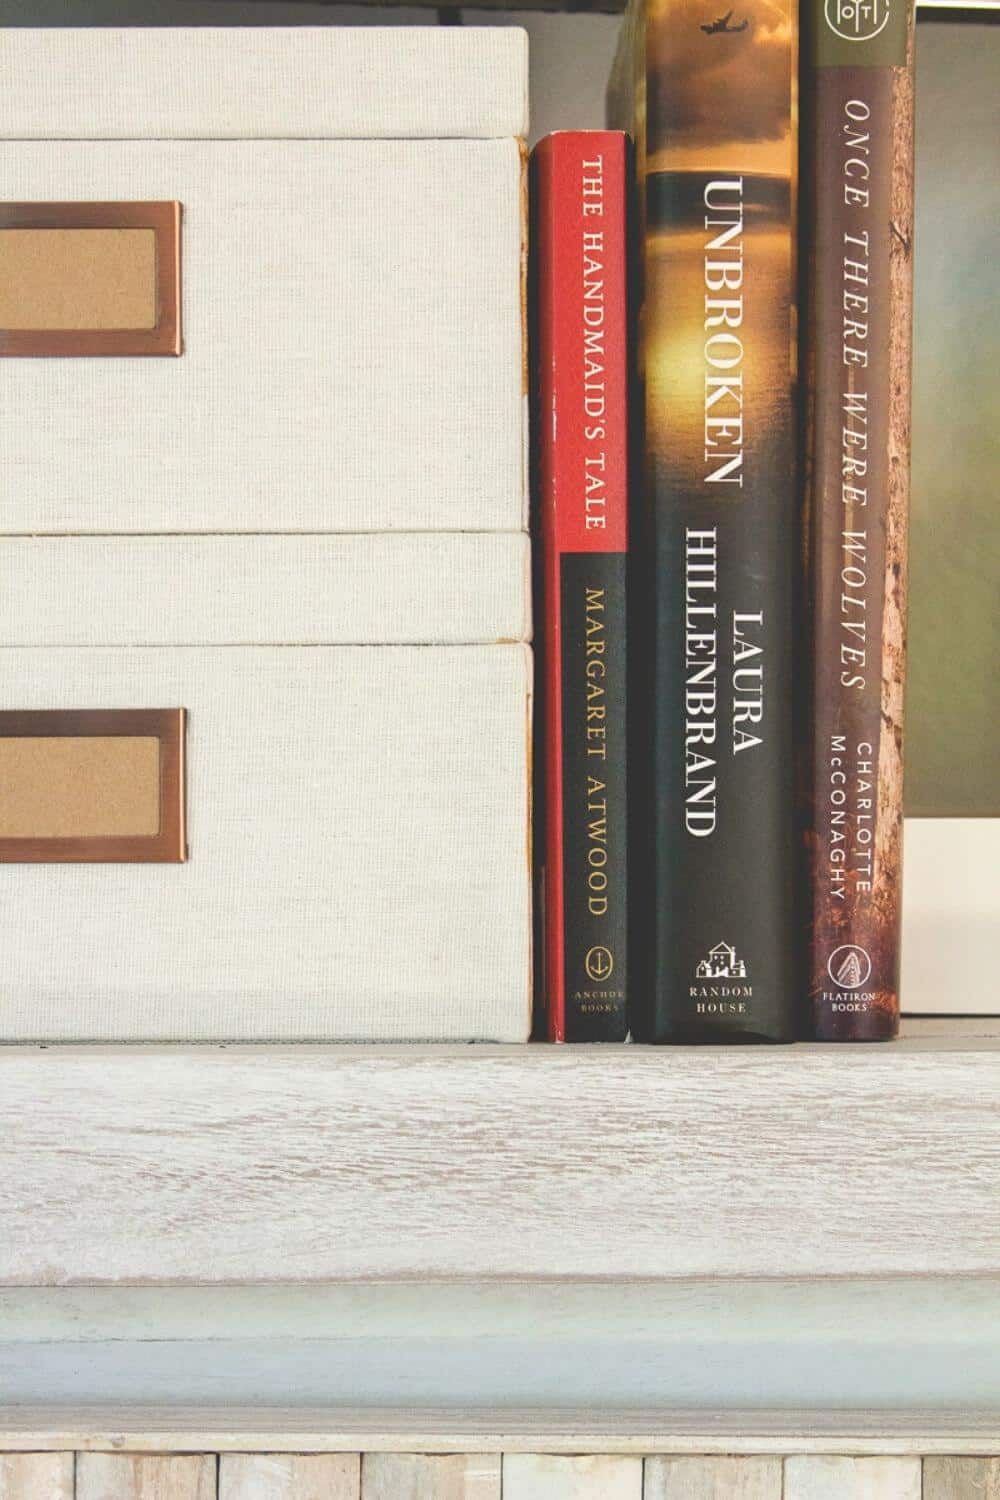 The Handmaid's Tale, Unbroken, and Once There Were Wolves, some of my favorite books, on a shelf